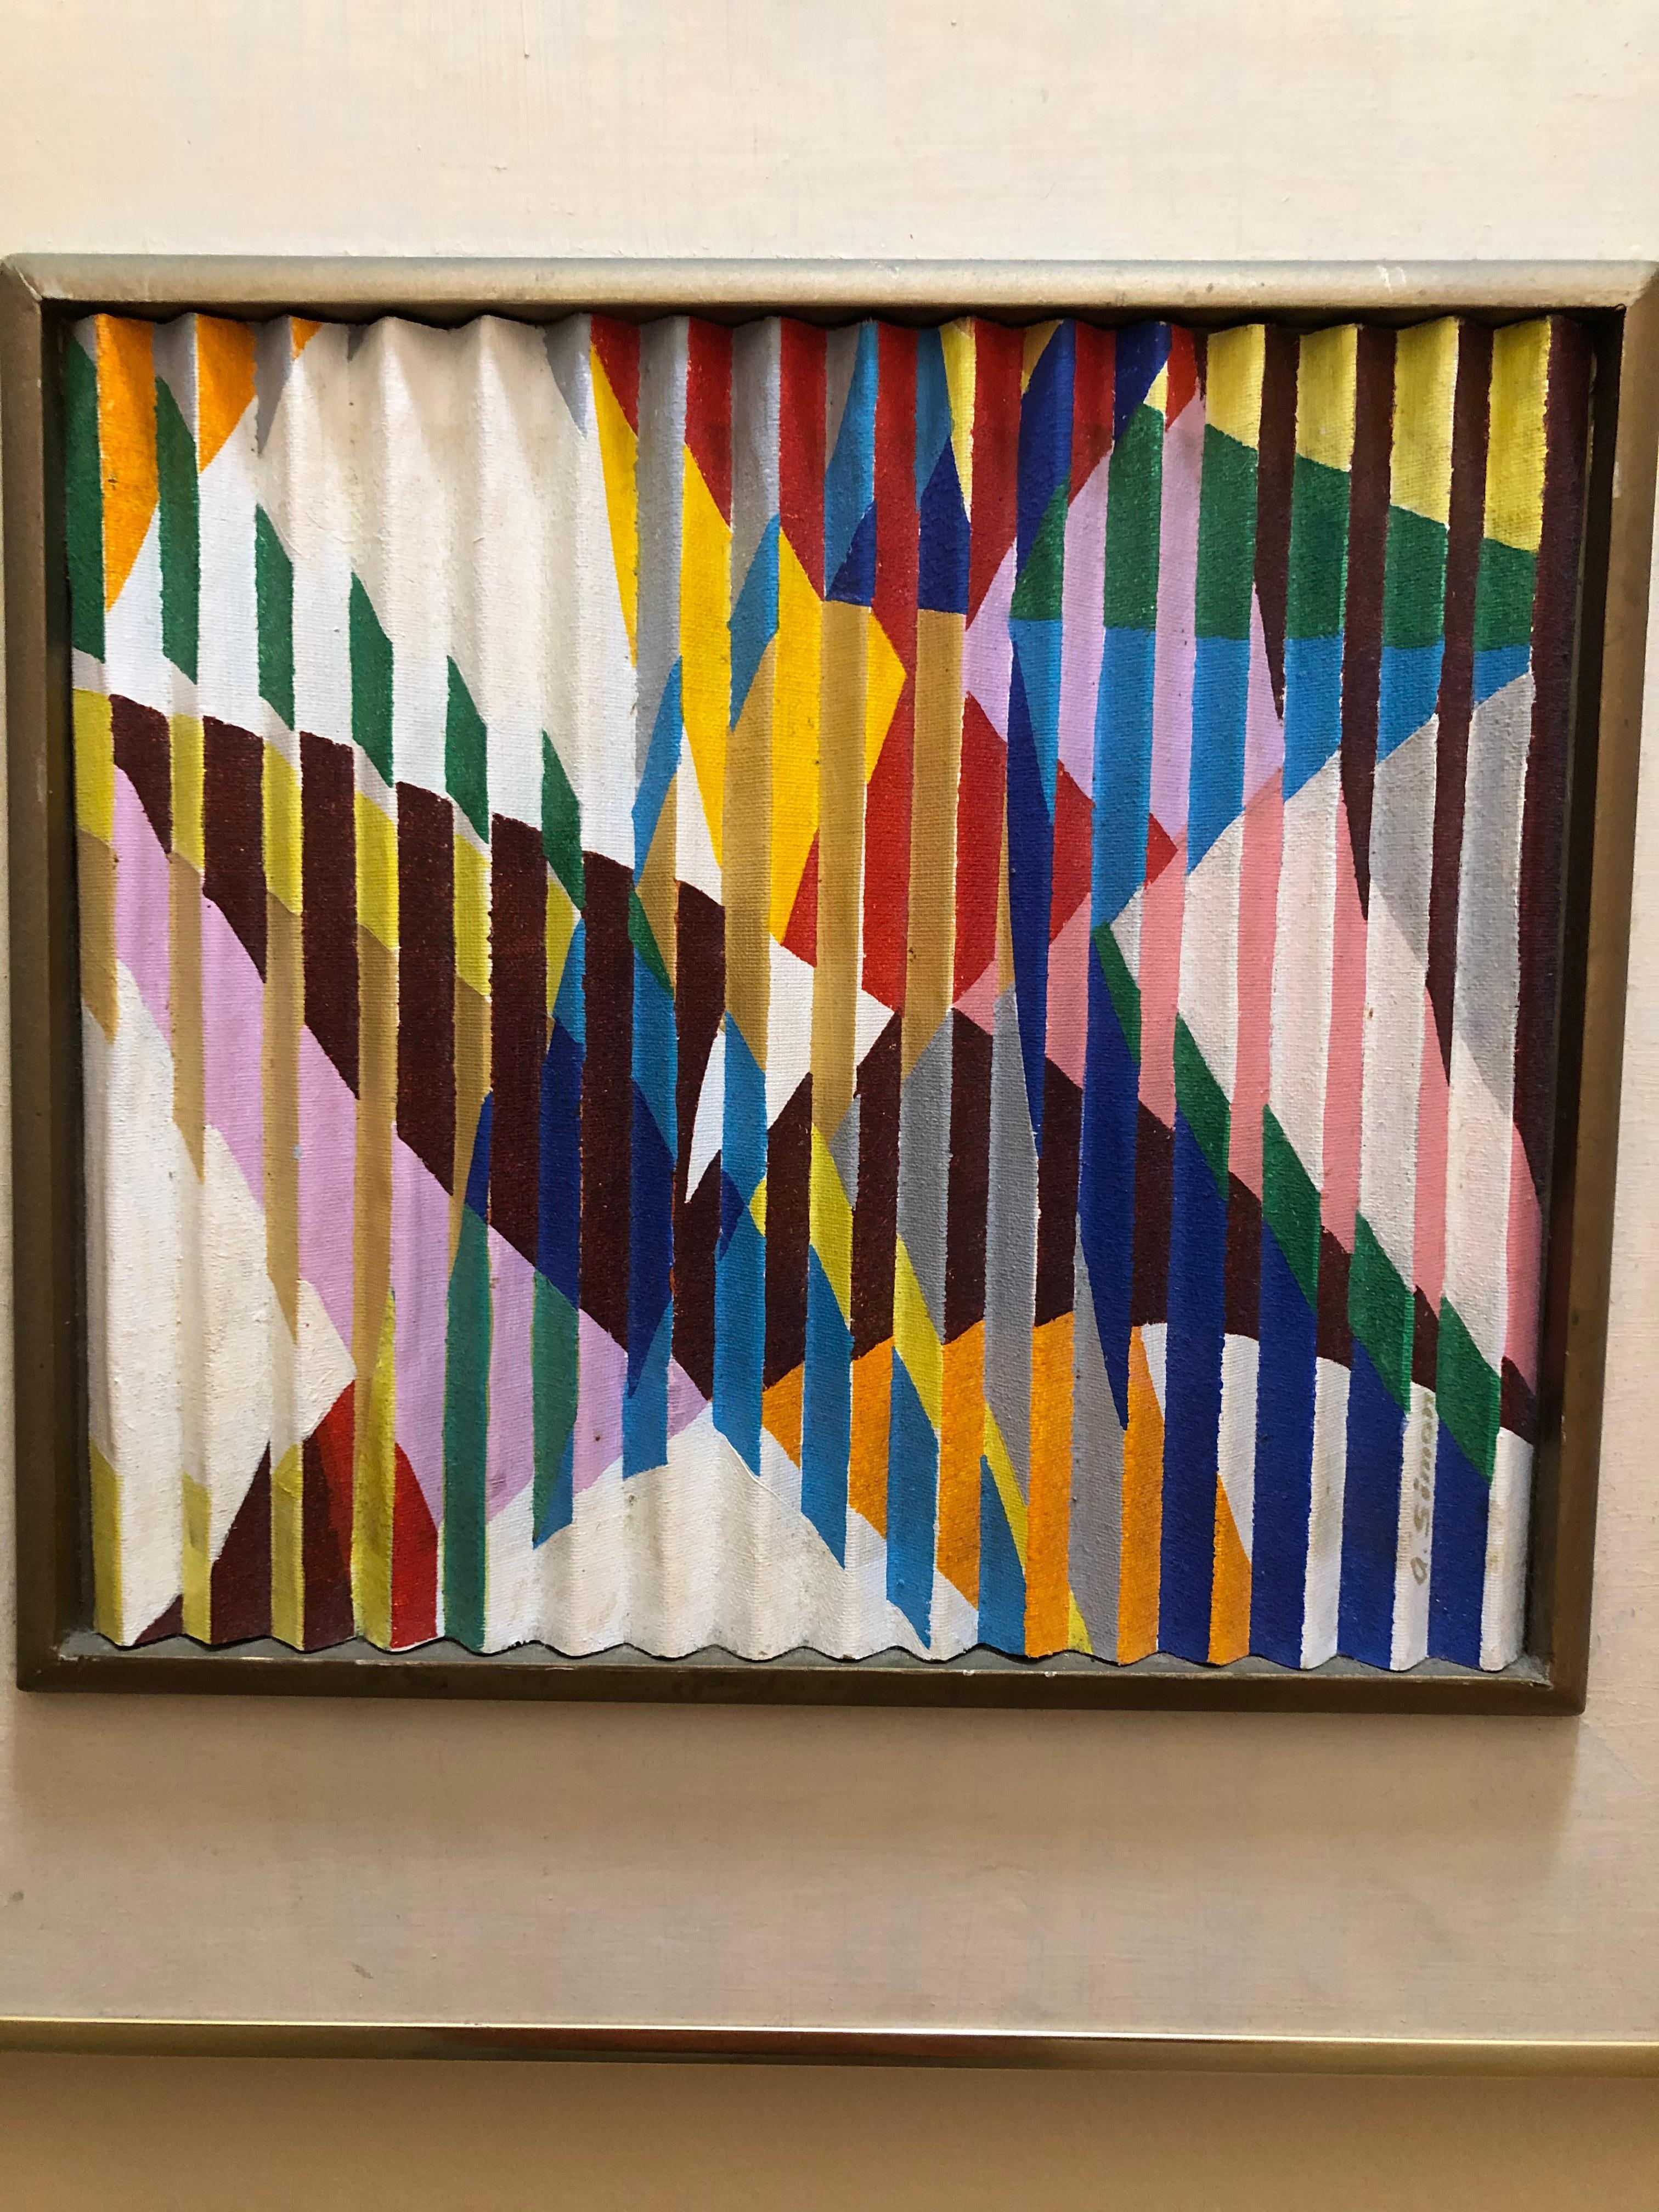 Allen Simon: 1917-2007. He was born in England but lived and studied in Ney York city. He studied at Cooper Union, National Academy of Design and the Art Students League. He is best known for these optical abstract paintings that were inspired by